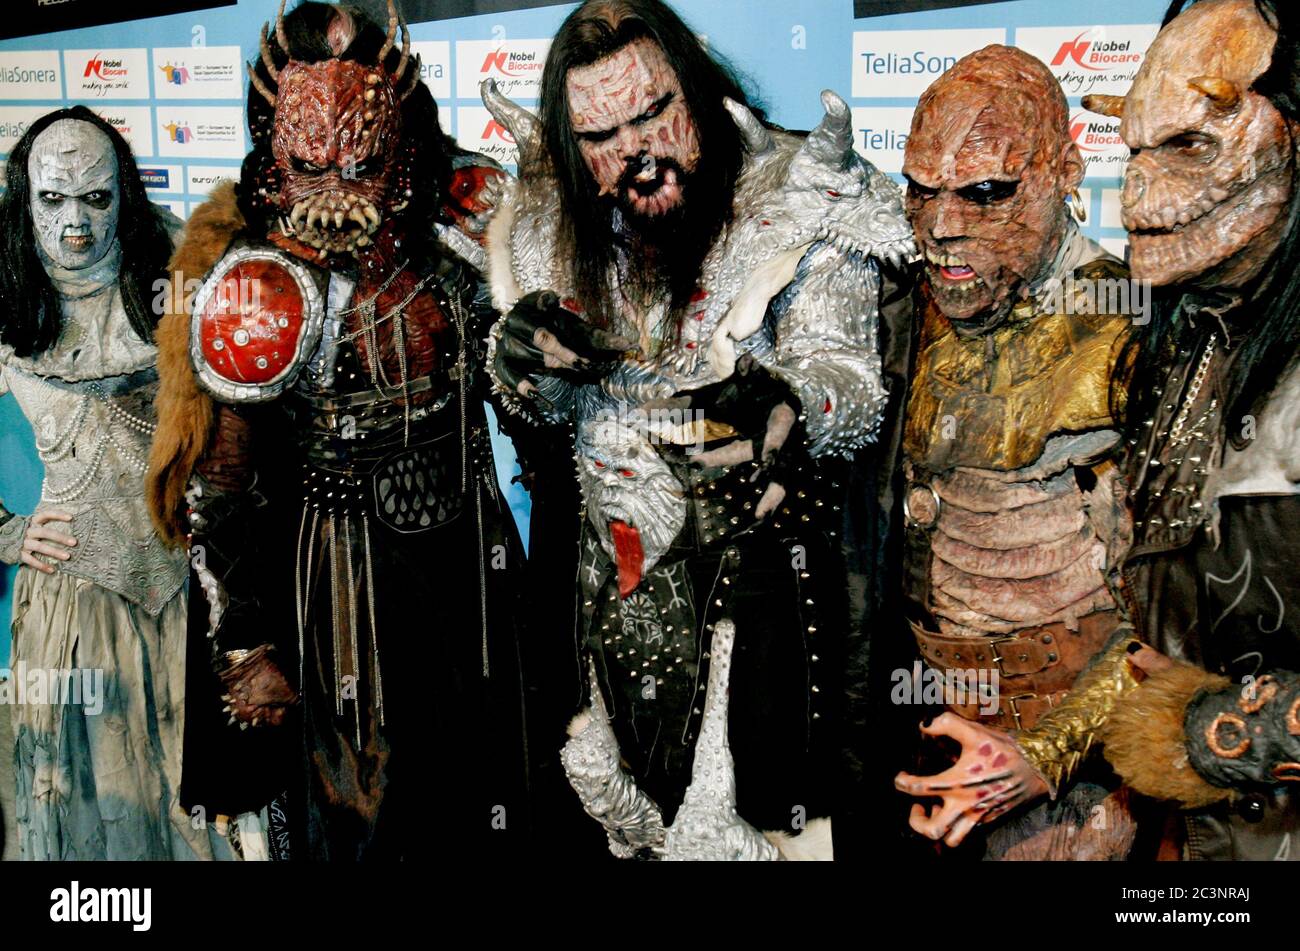 Helsinki, Finland 20070512 Press conference with the Finnish band Lordi  during the Eurovision Song Contest. Photo Jeppe Gustafsson Stock Photo -  Alamy